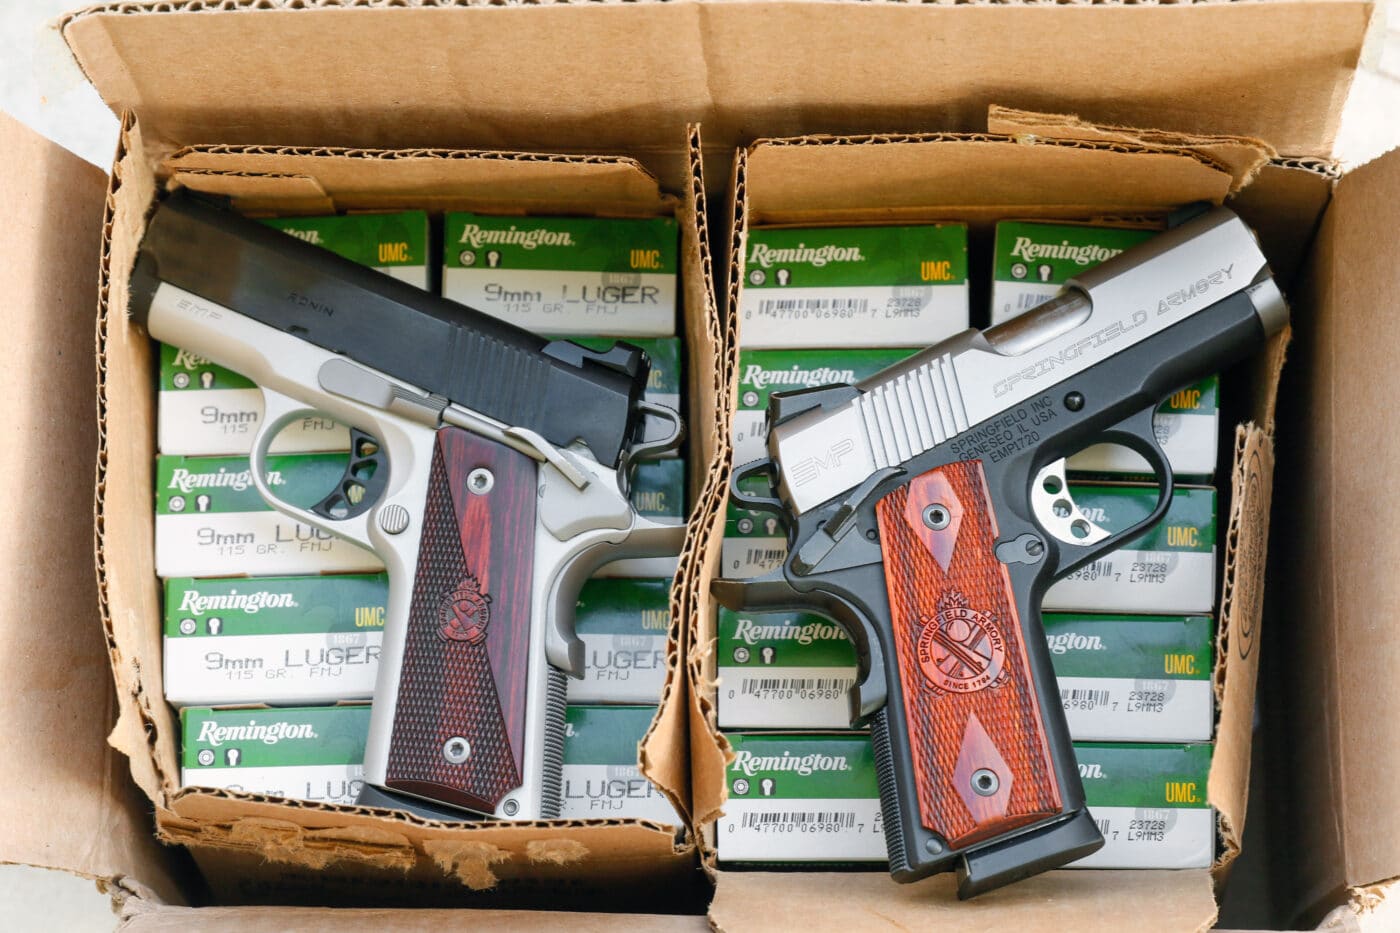 Two Springfield EMP pistols in boxes with ammo